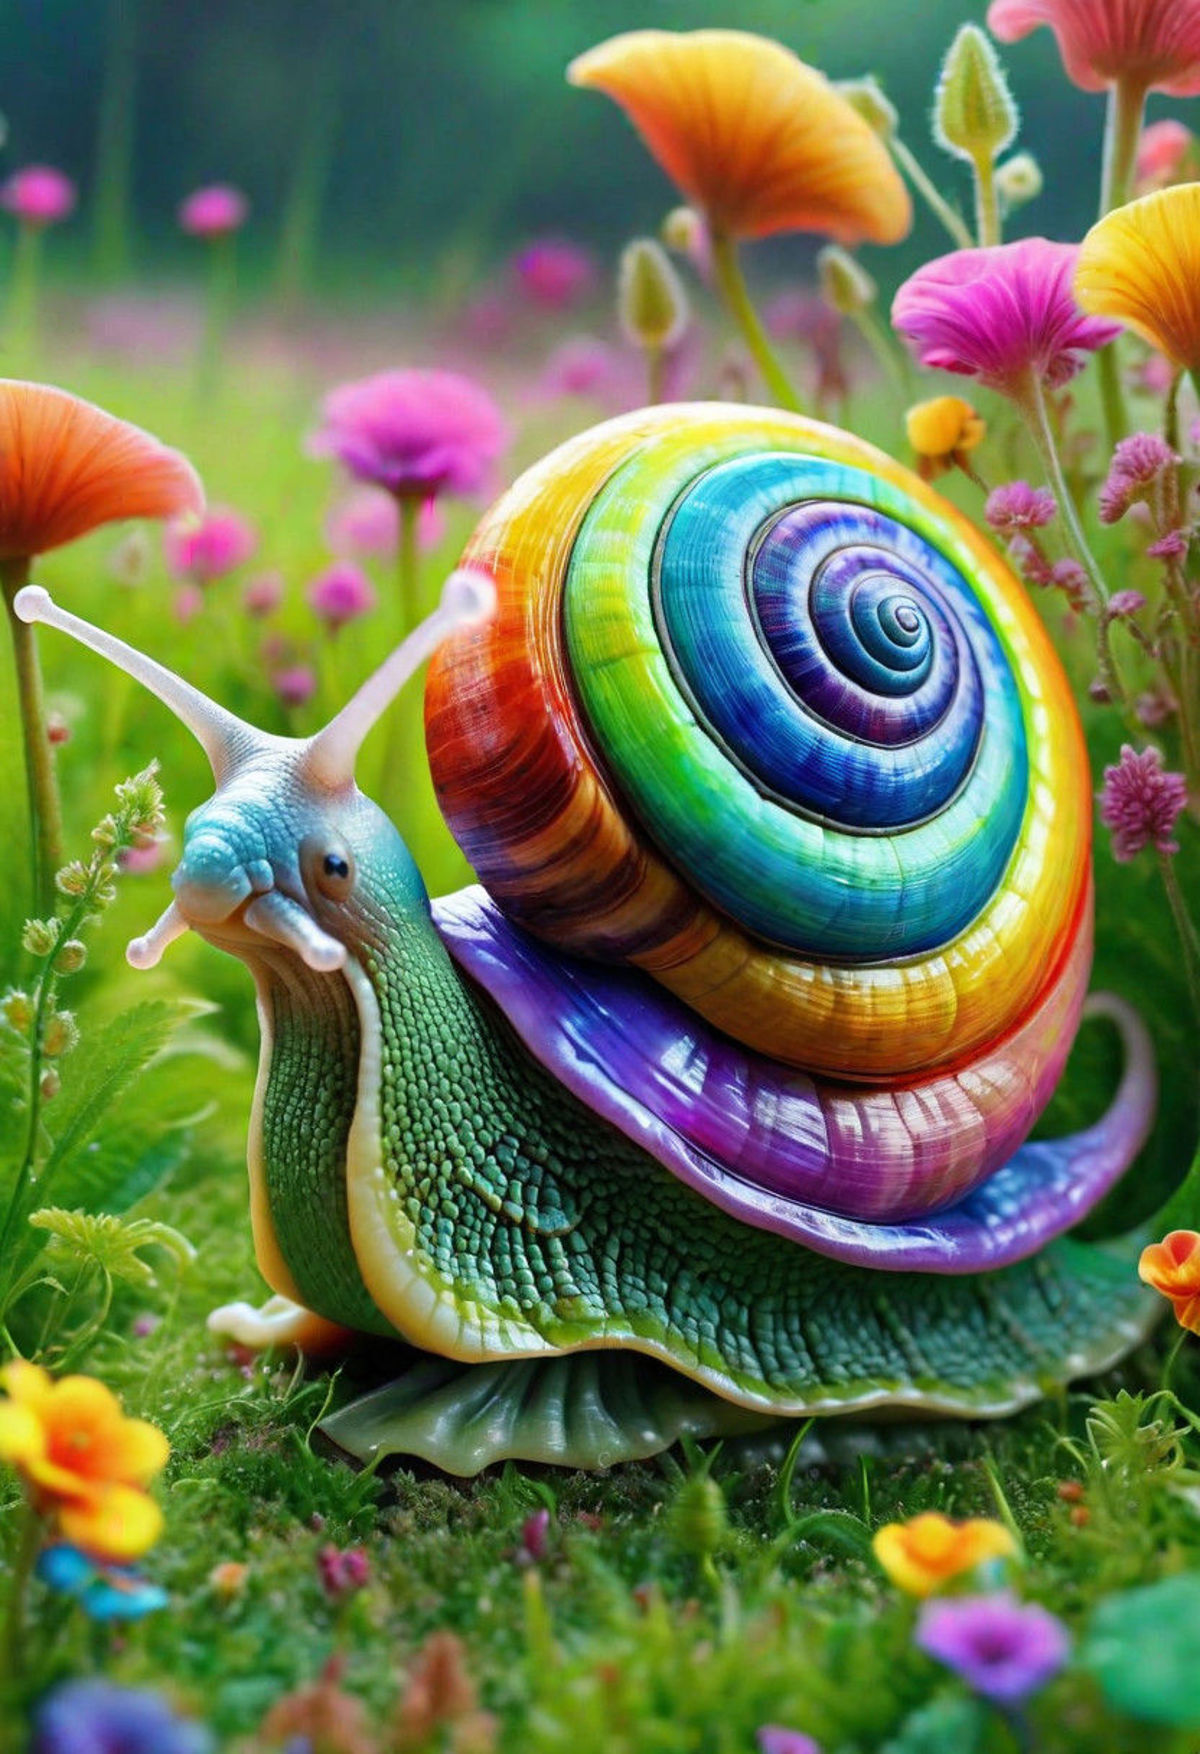 A colorful, rainbow-colored snail with a shell that looks like a spiral on top.